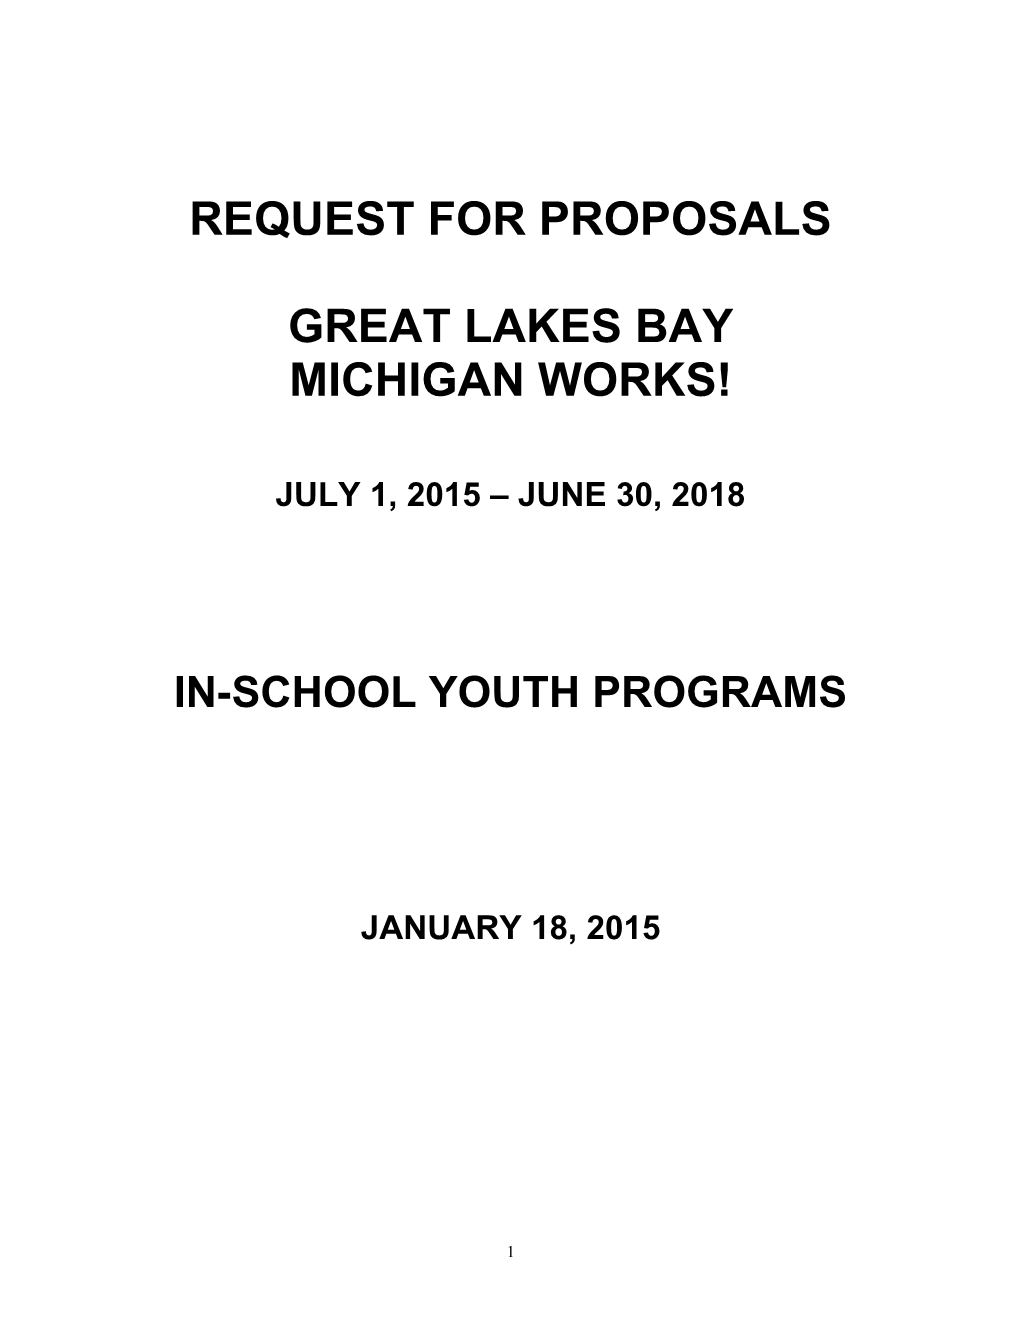 Request for Proposals s17